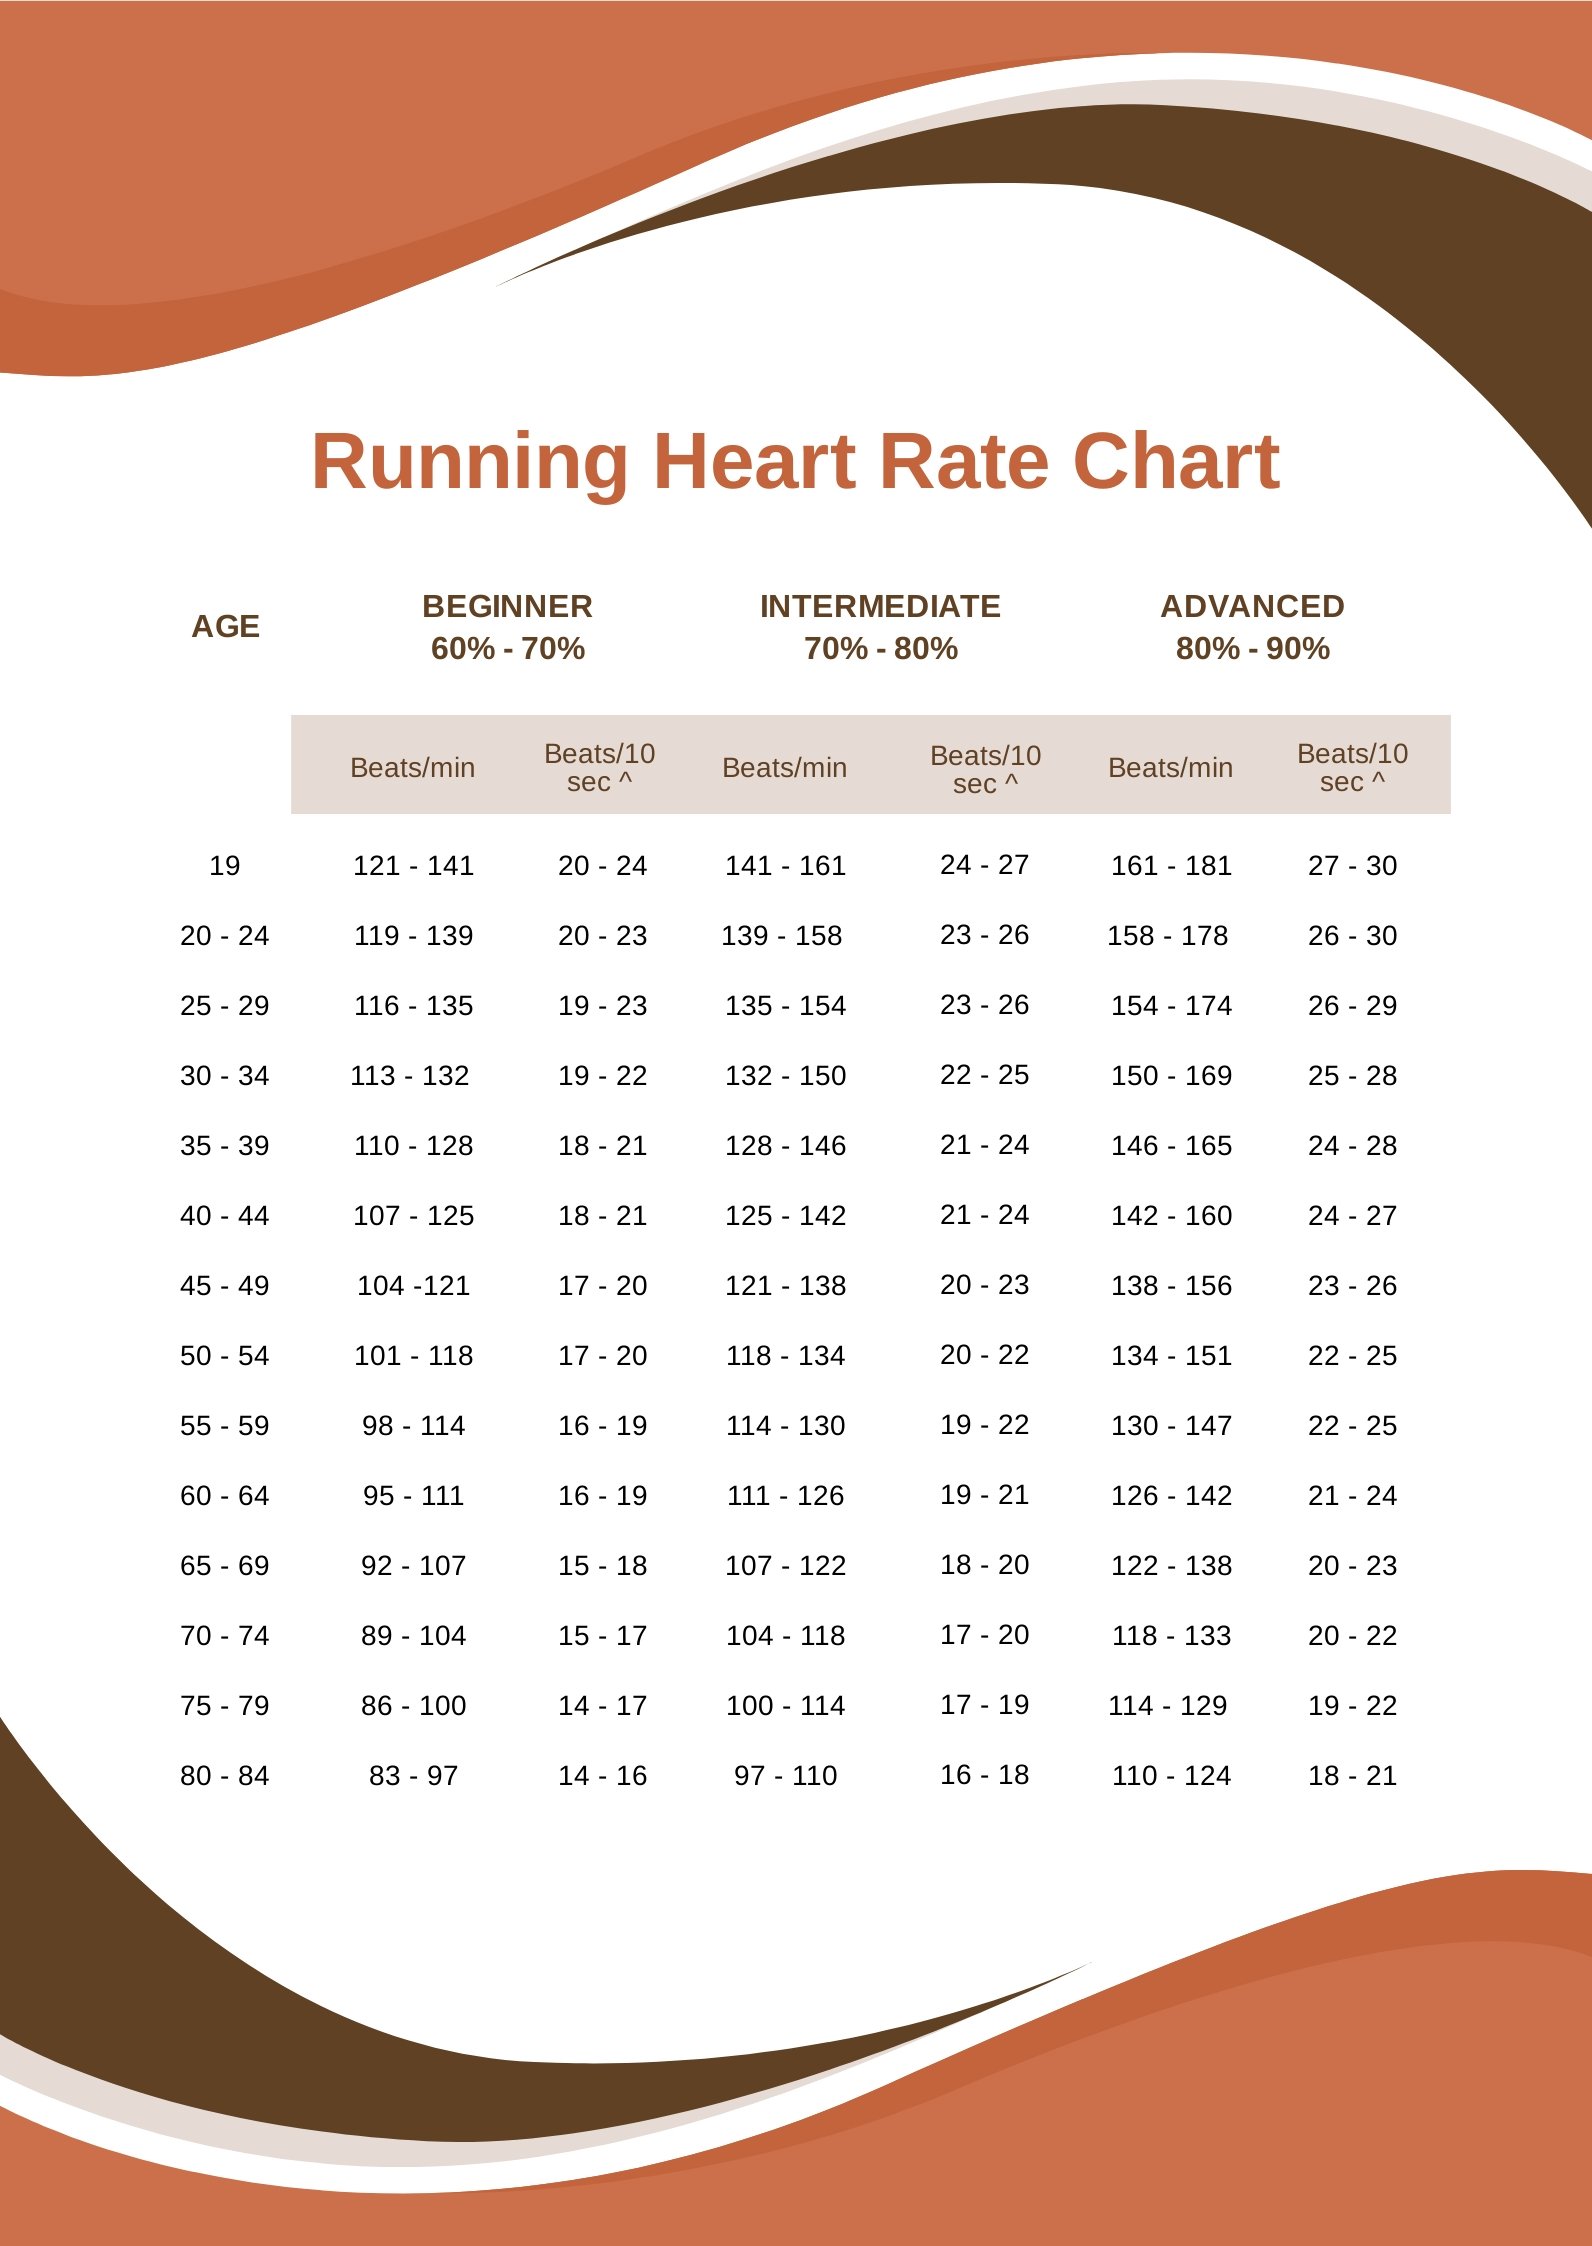 Running Heart Rate Chart in PDF